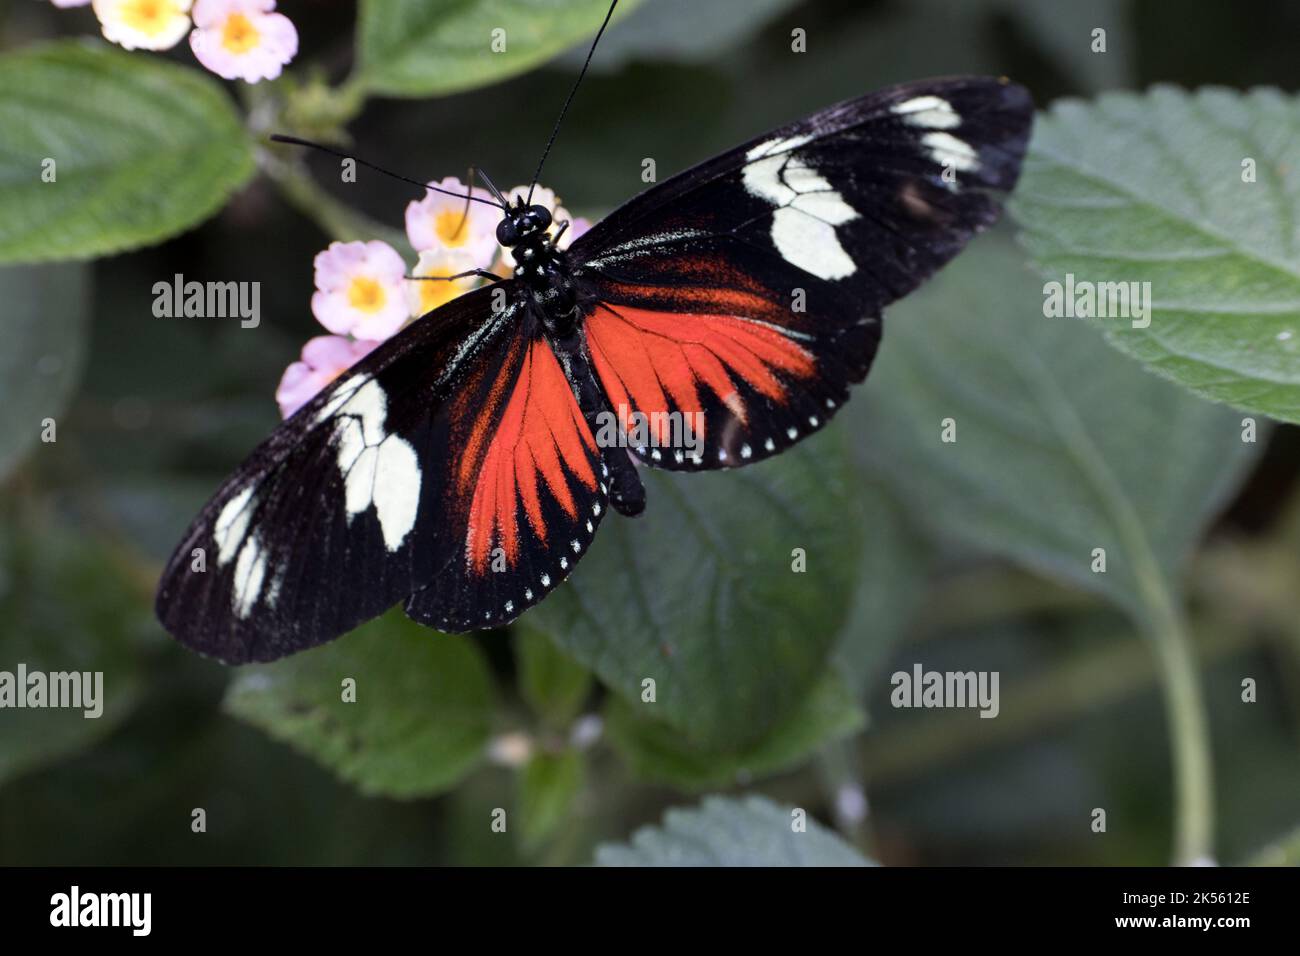 Single Postman butterfly Heliconius melpomene is a brightly colored butterfly found throughout Central and South America.; Stratford on Avon butterfly Stock Photo